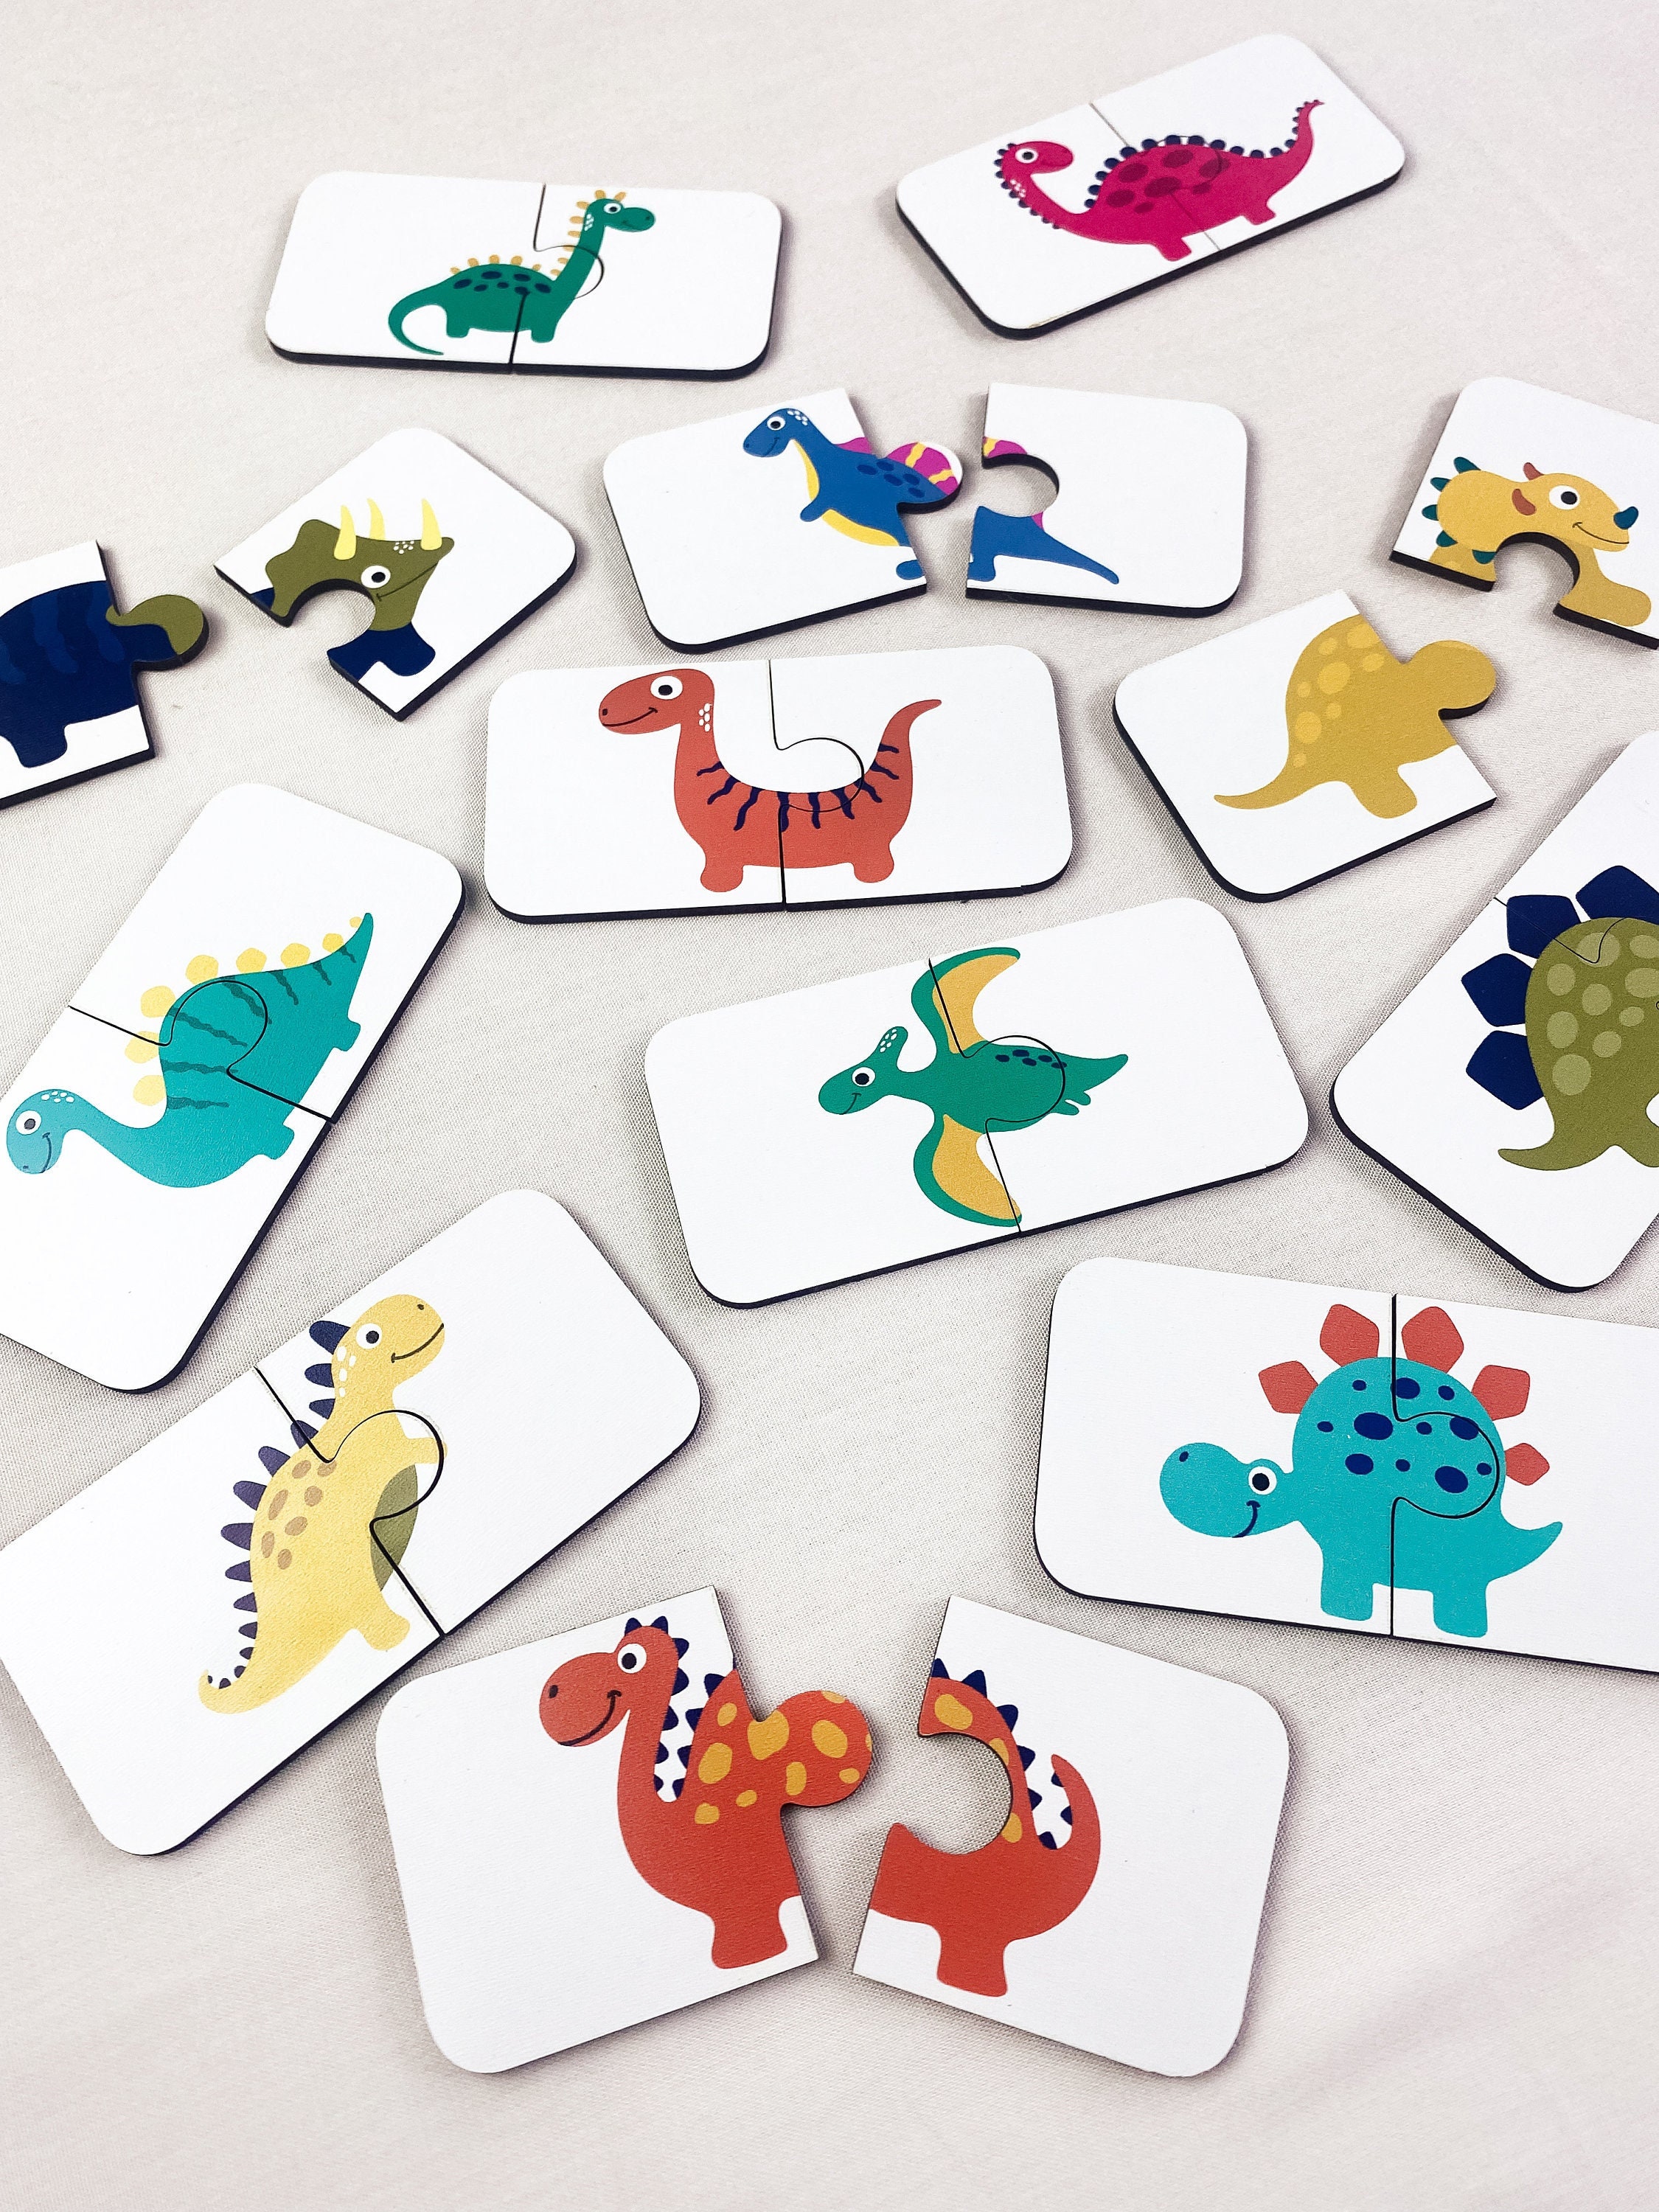 Engage Your Child's Imagination With This 2-Piece Montessori Busy Book Set  - Dinosaur & Farm Themed Learning Toys!